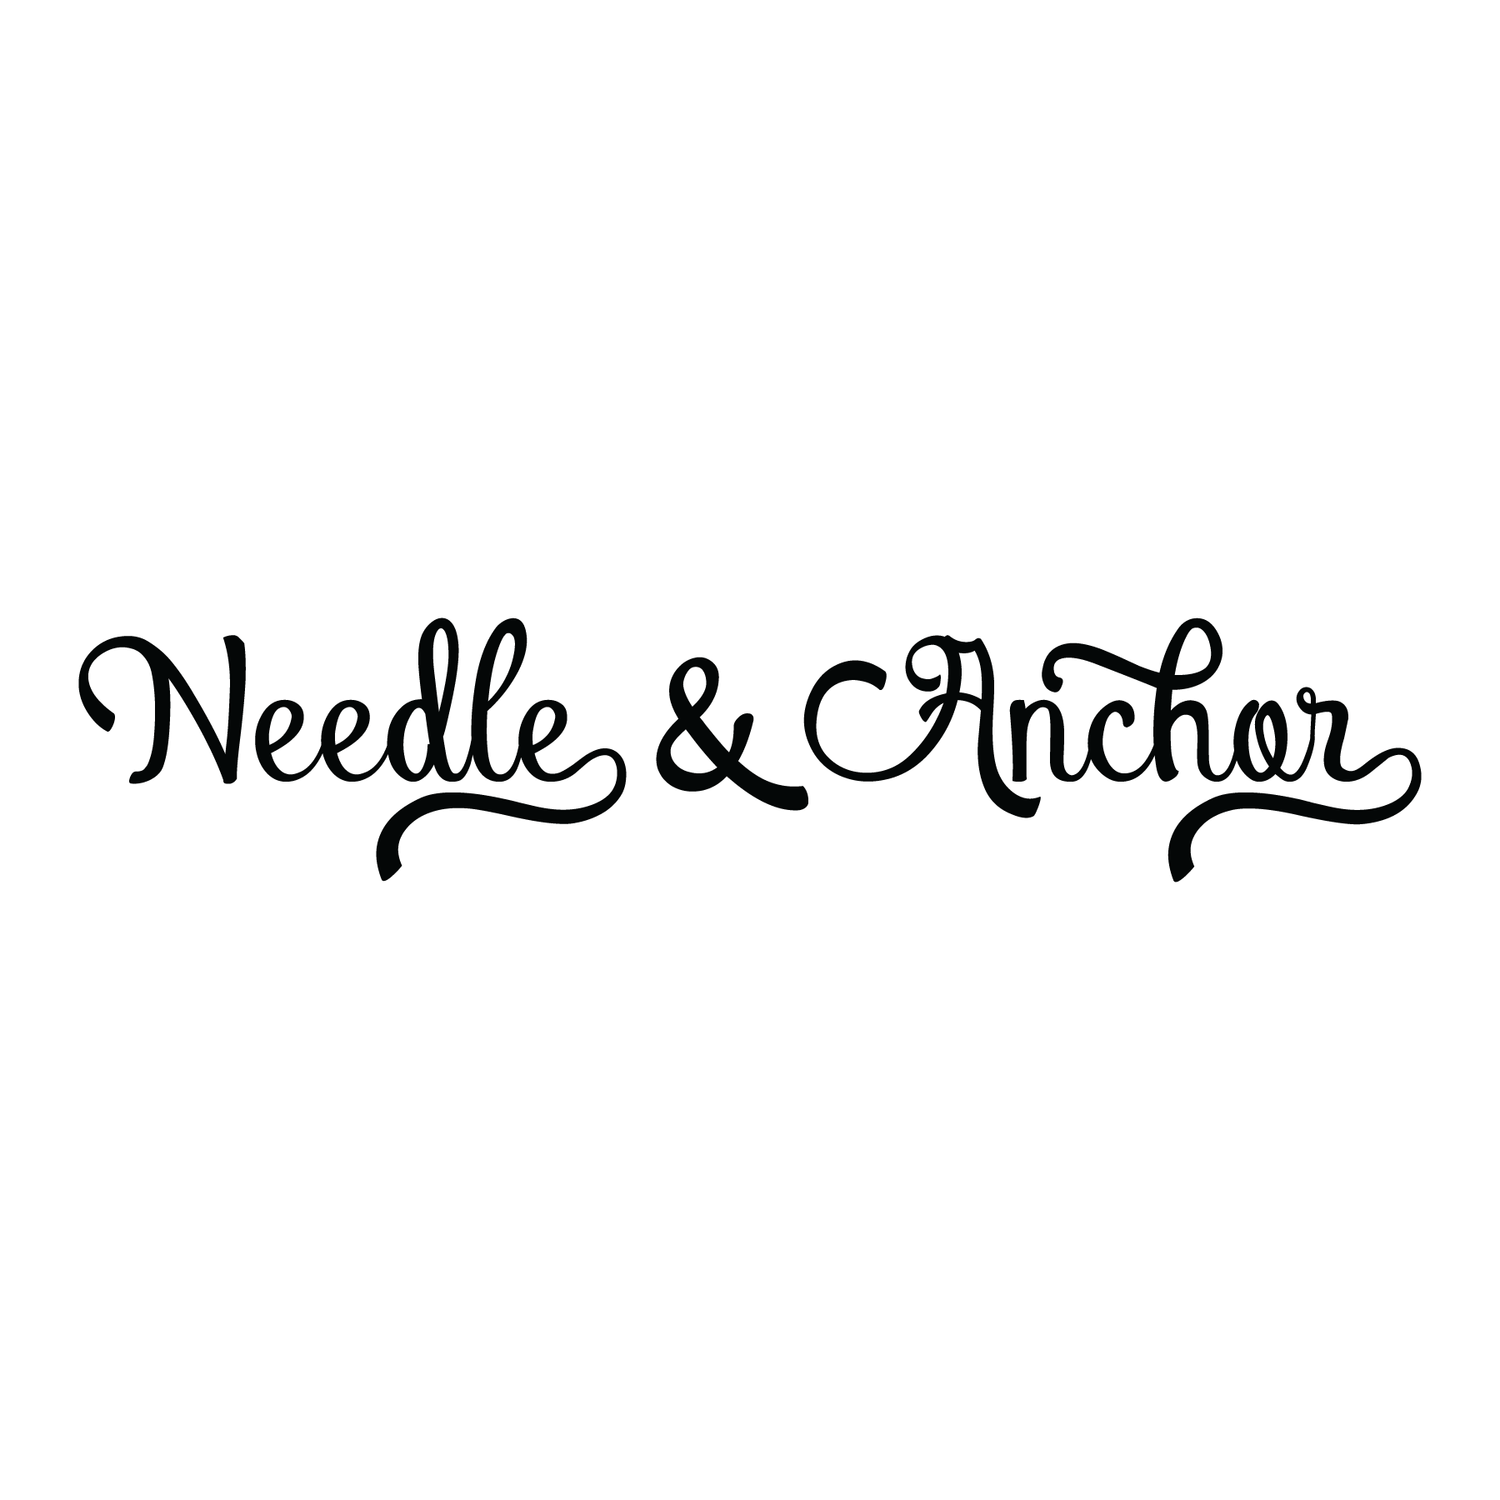 Needle and Anchor